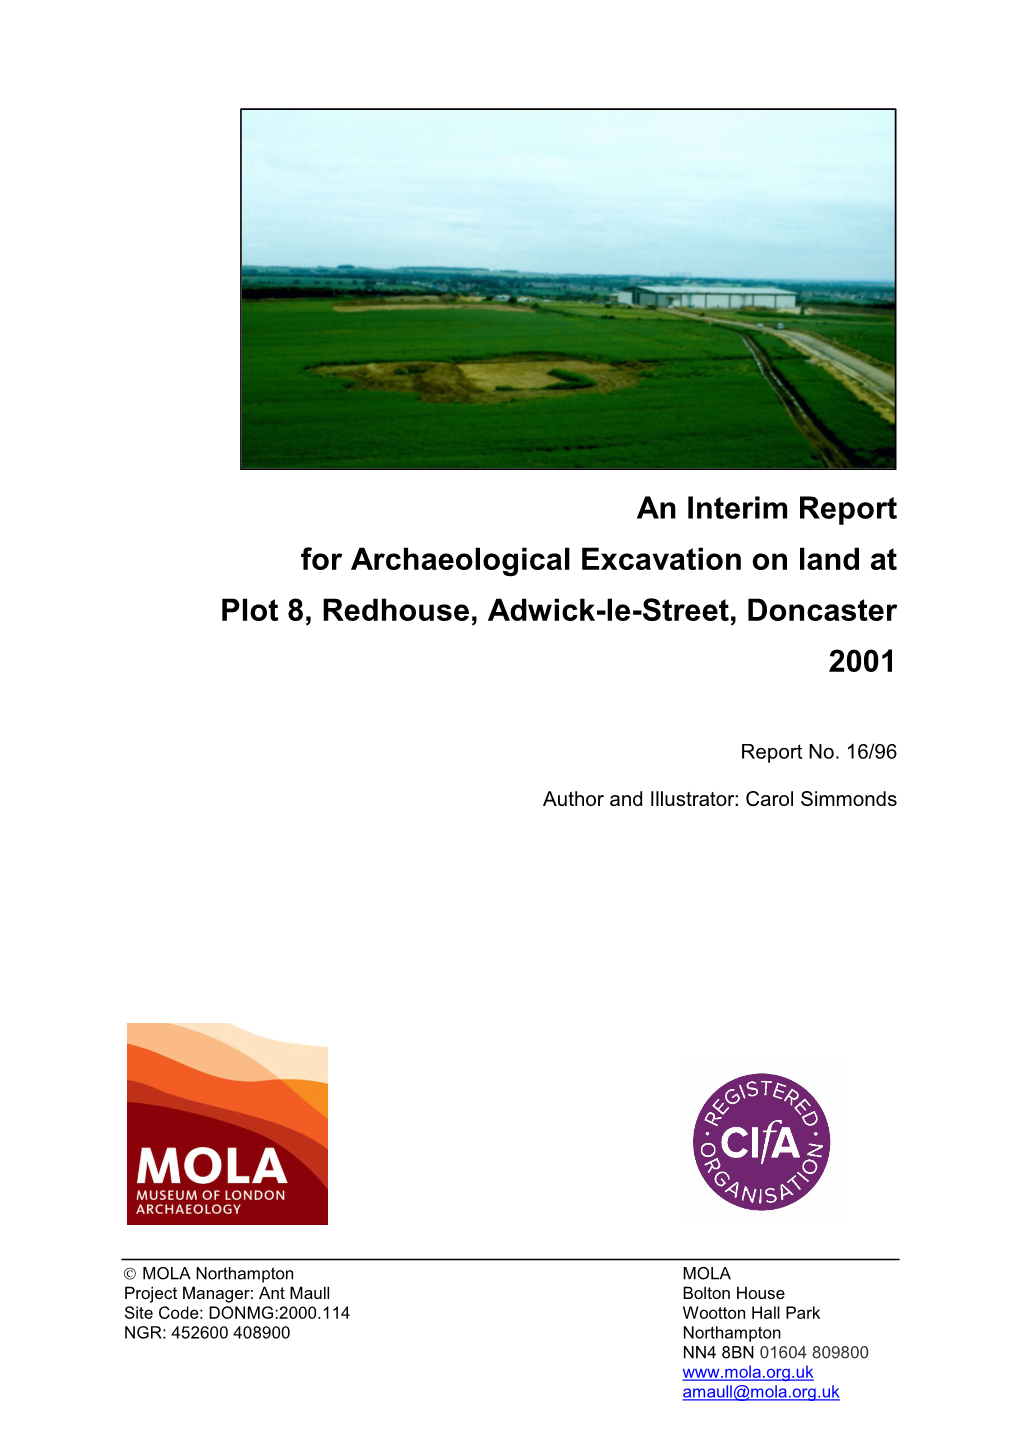 An Interim Report for Archaeological Excavation on Land at Plot 8, Redhouse, Adwick-Le-Street, Doncaster 2001